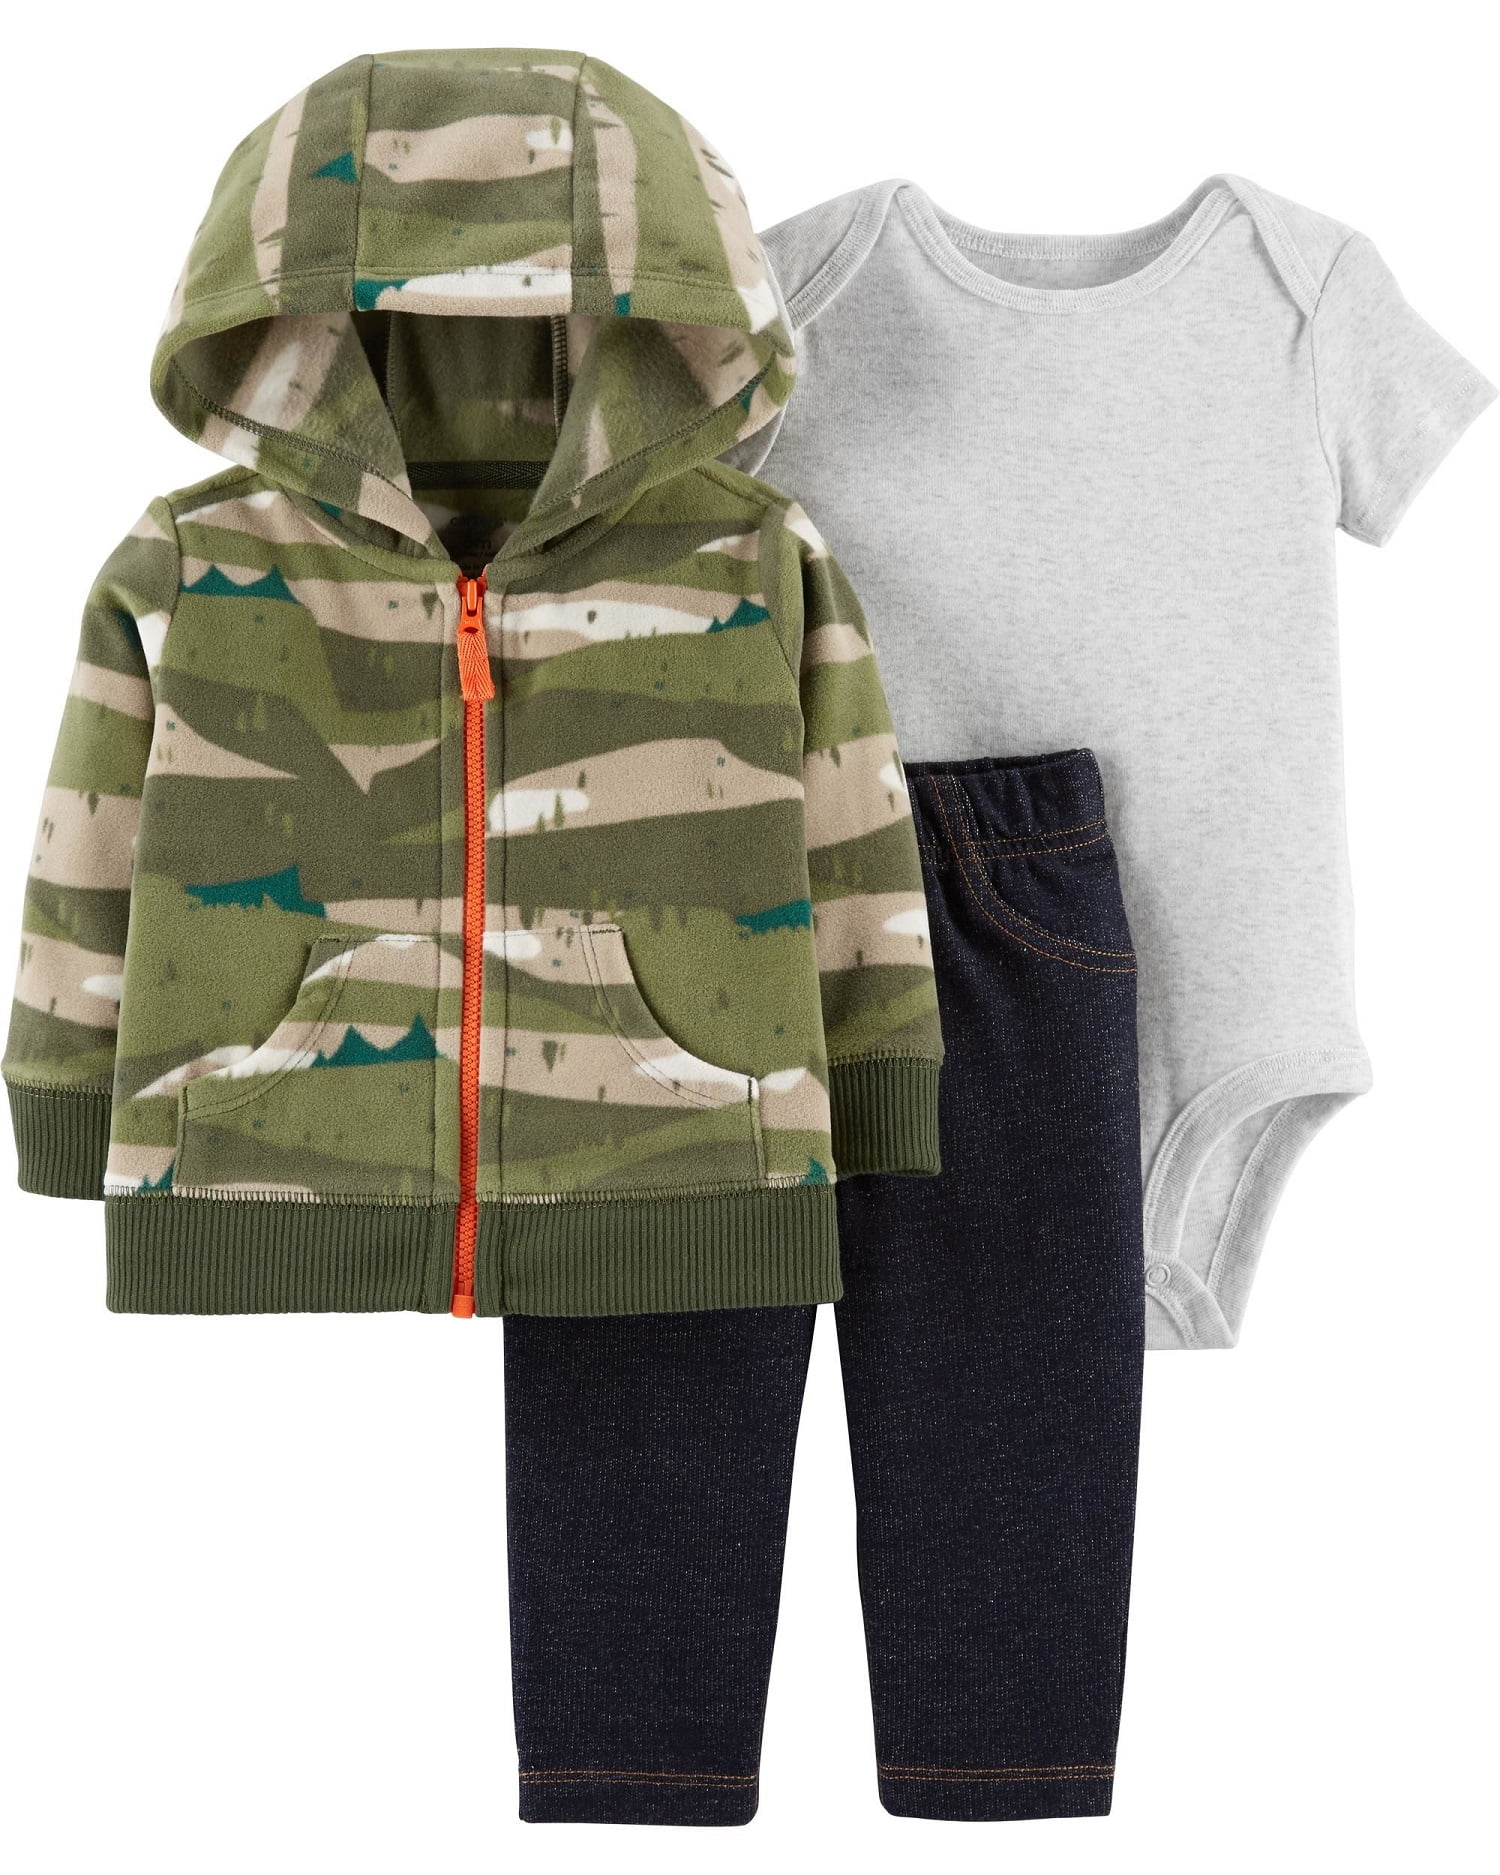 BABY BOYS 3 PIECE OUTFIT WITH HOODED JACKET 